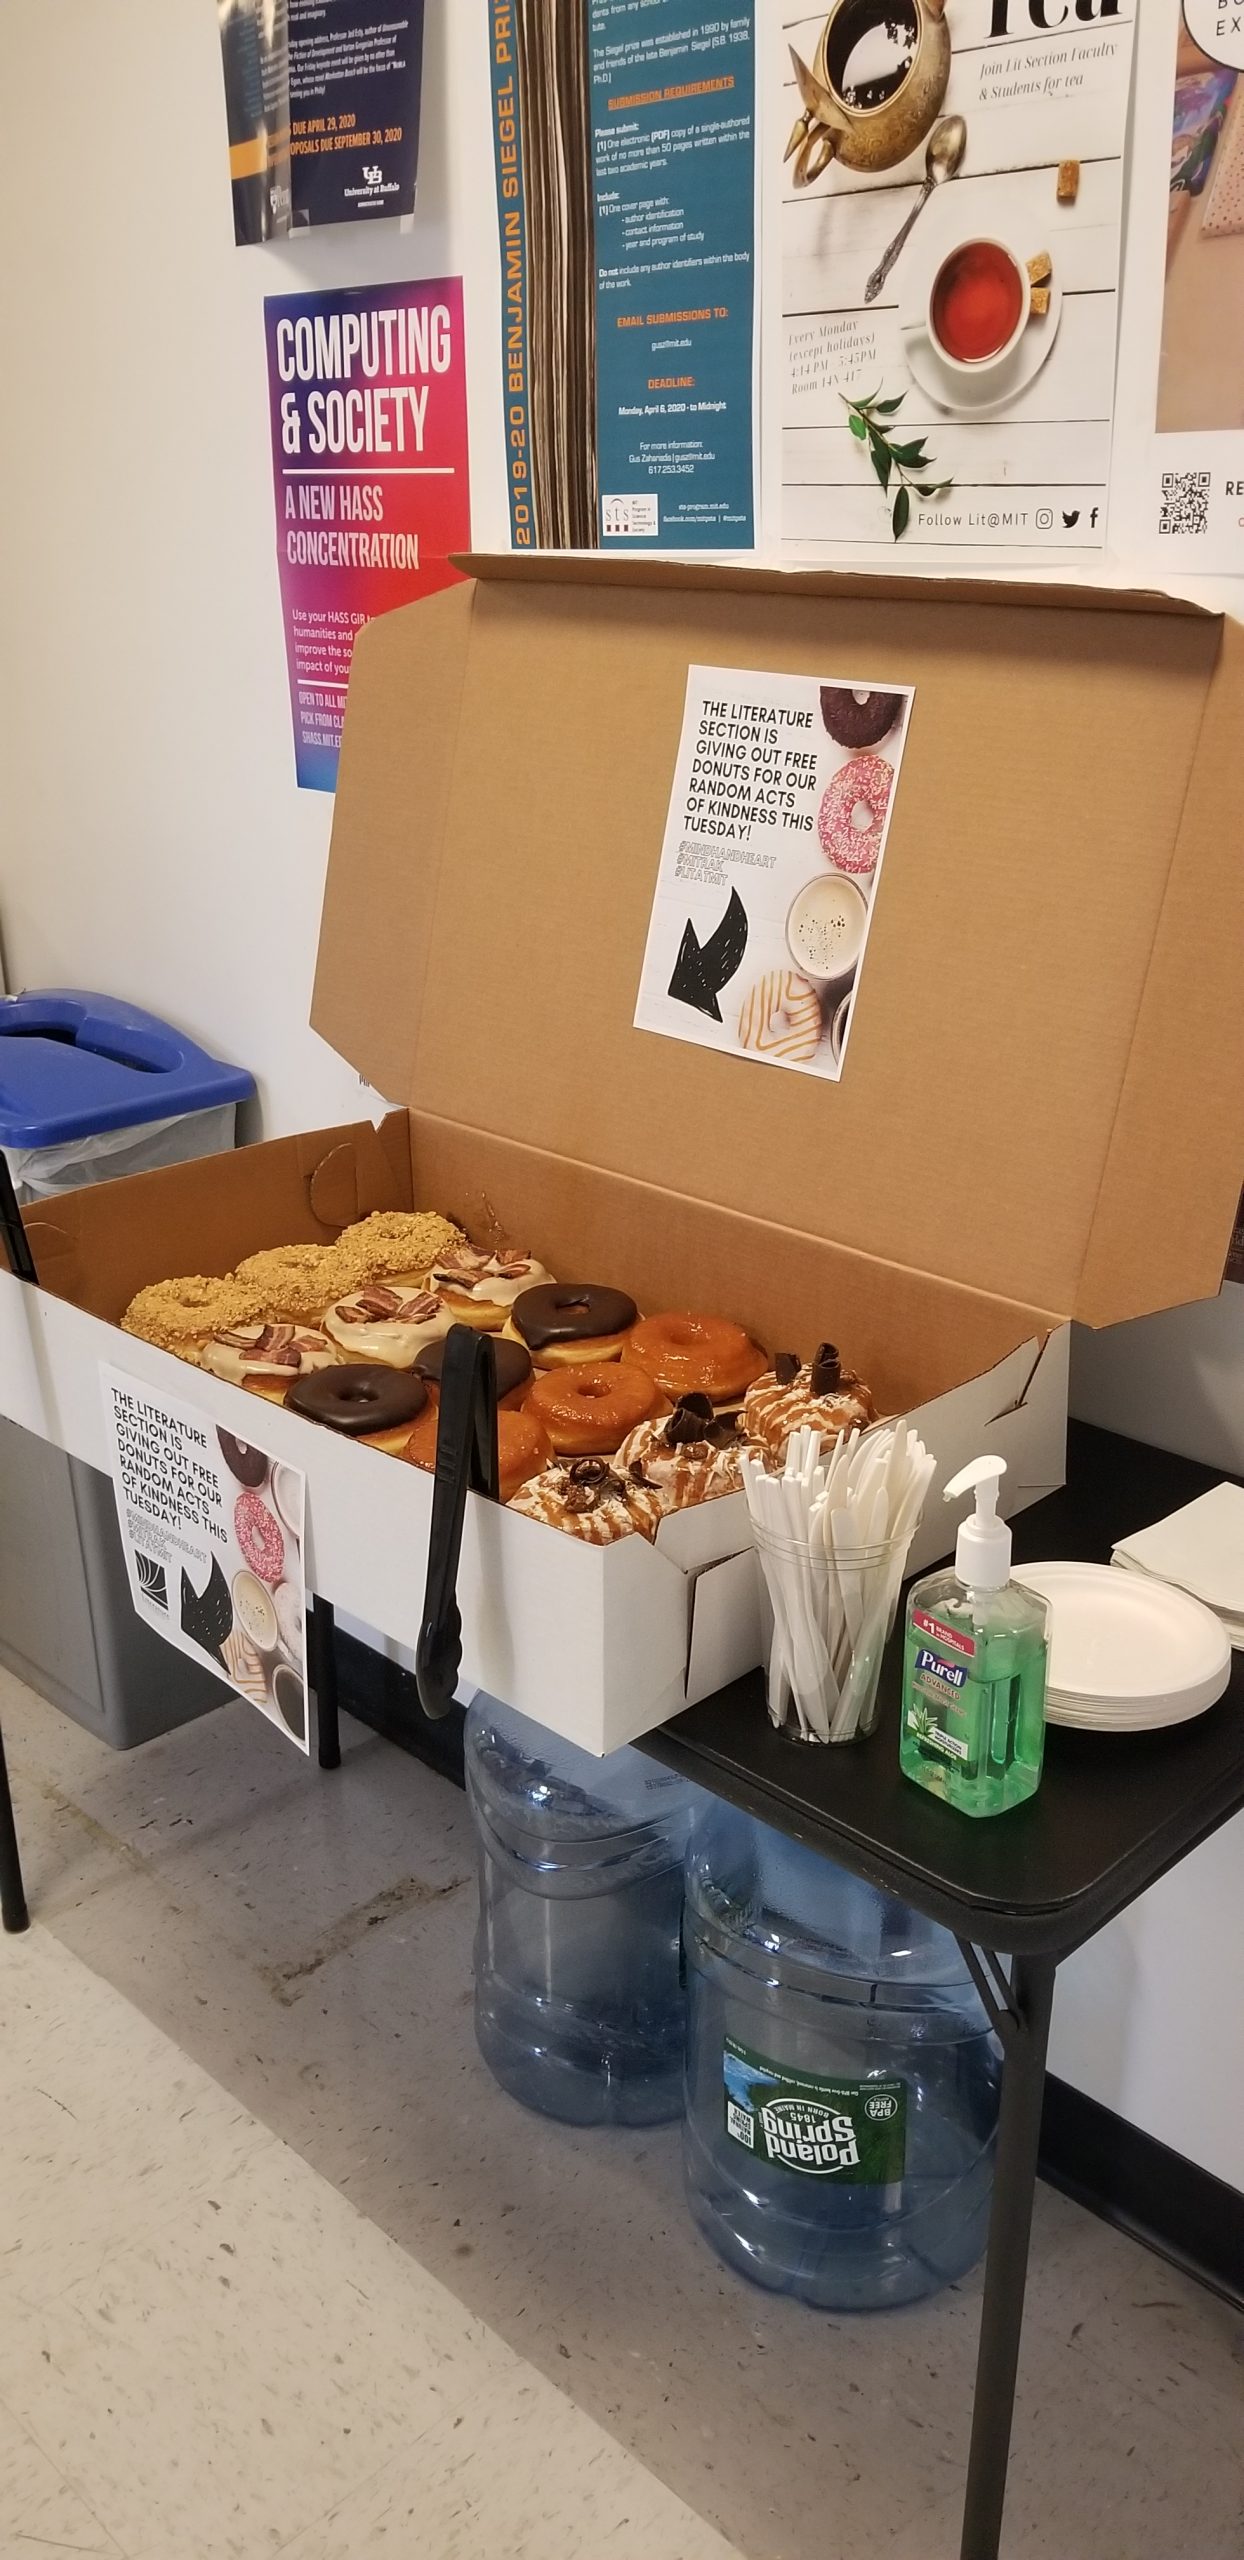 The Literature Section is giving out free donuts for our Random Acts of Kindness!